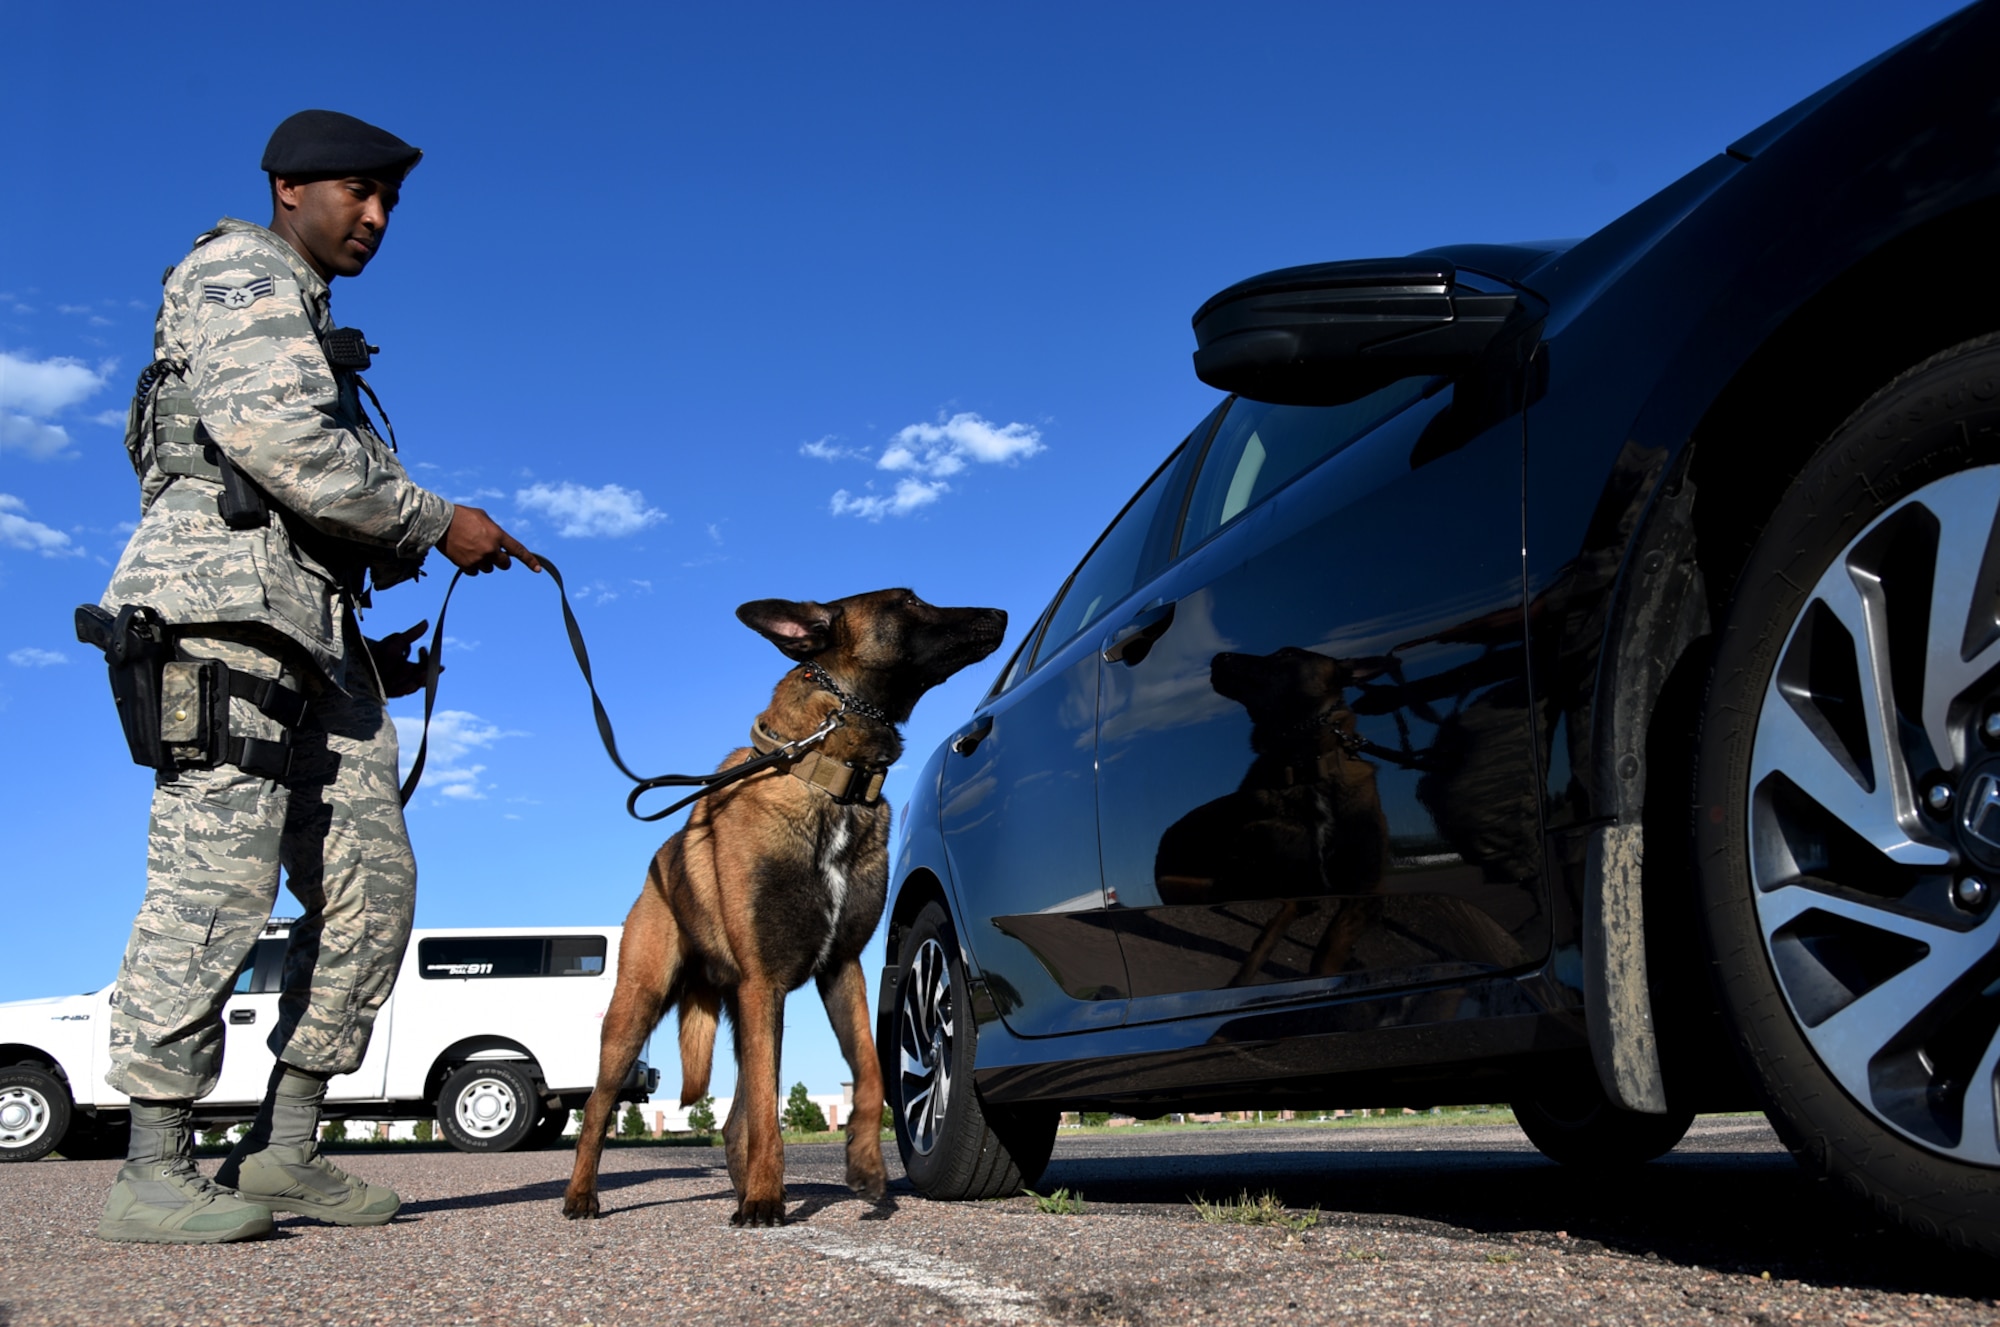 Senior Airman Tariq Russell, 21st Security Forces Squadron military working dog handler, and his partner, Ppaul, inspect a car at Peterson Air Force Base, Colo., June 14, 2016. Russell pays close attention to Ppaul waiting for a sign he has detected something suspicious. (U.S. Air Force photo by Airman 1st Class Dennis Hoffman)